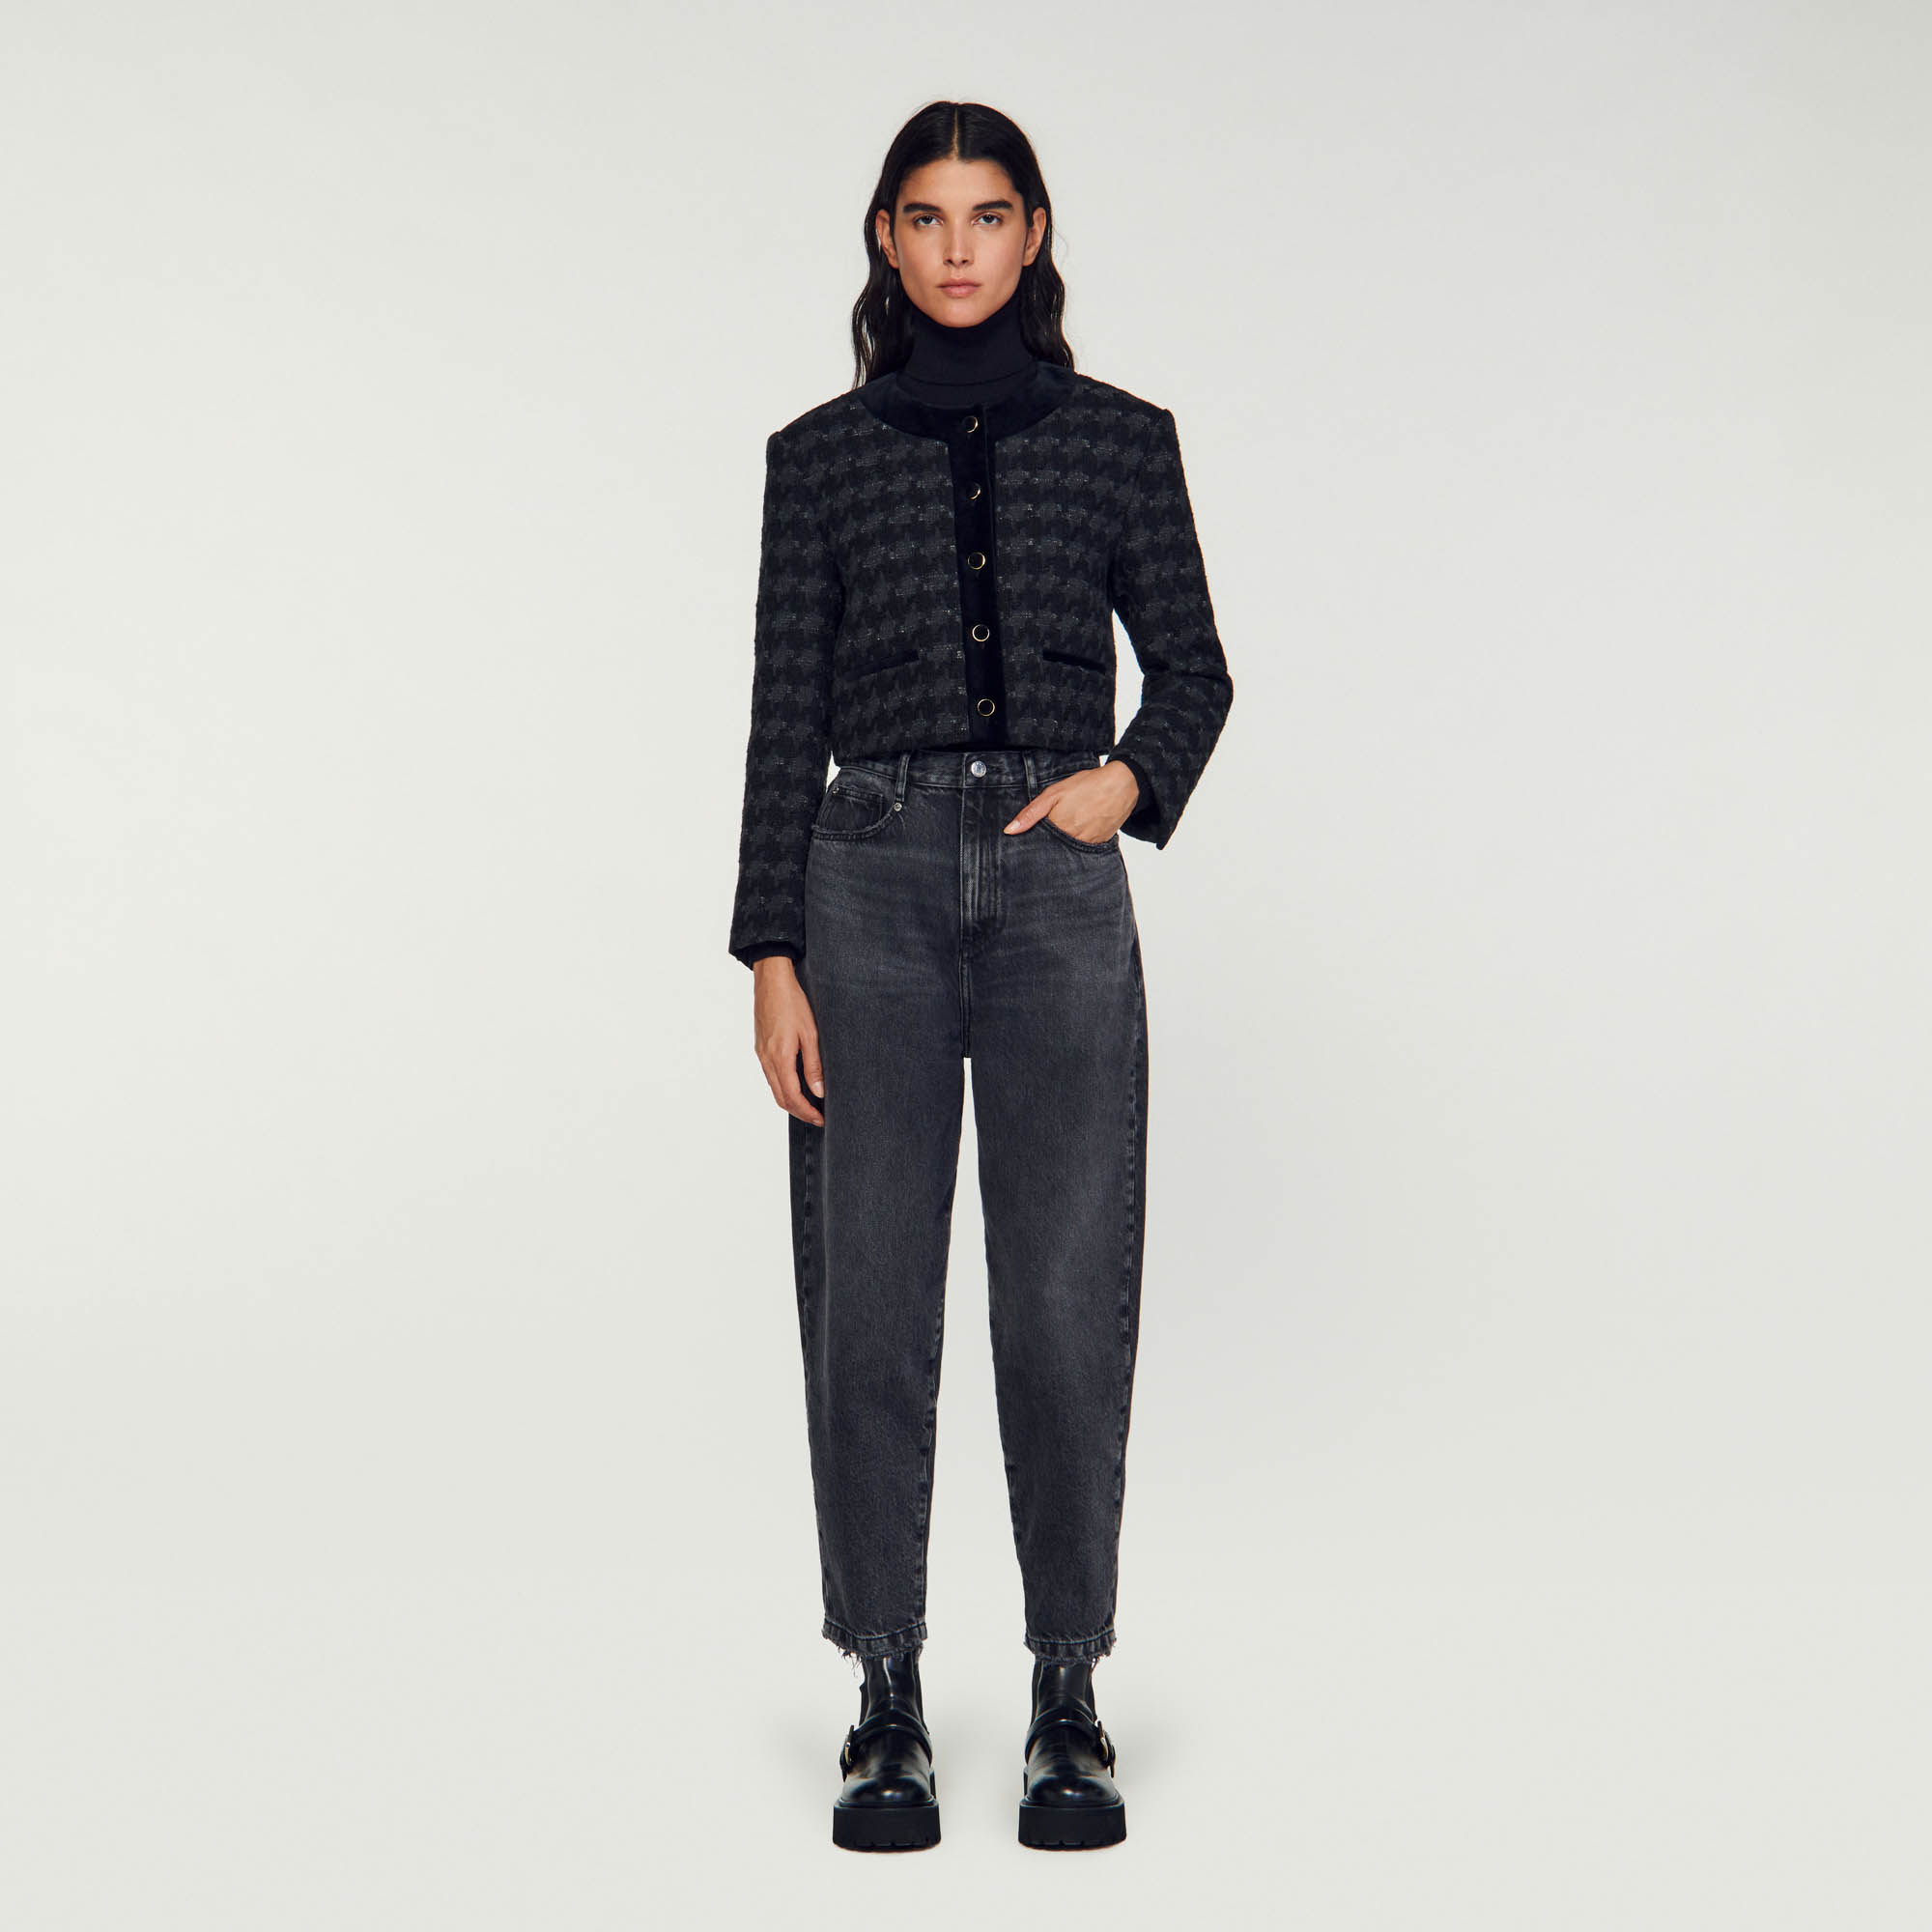 Sandro cotton Structured tweed cropped jacket featuring a houndstooth pattern and contrasting velvet details, plus long sleeves and a button fastening